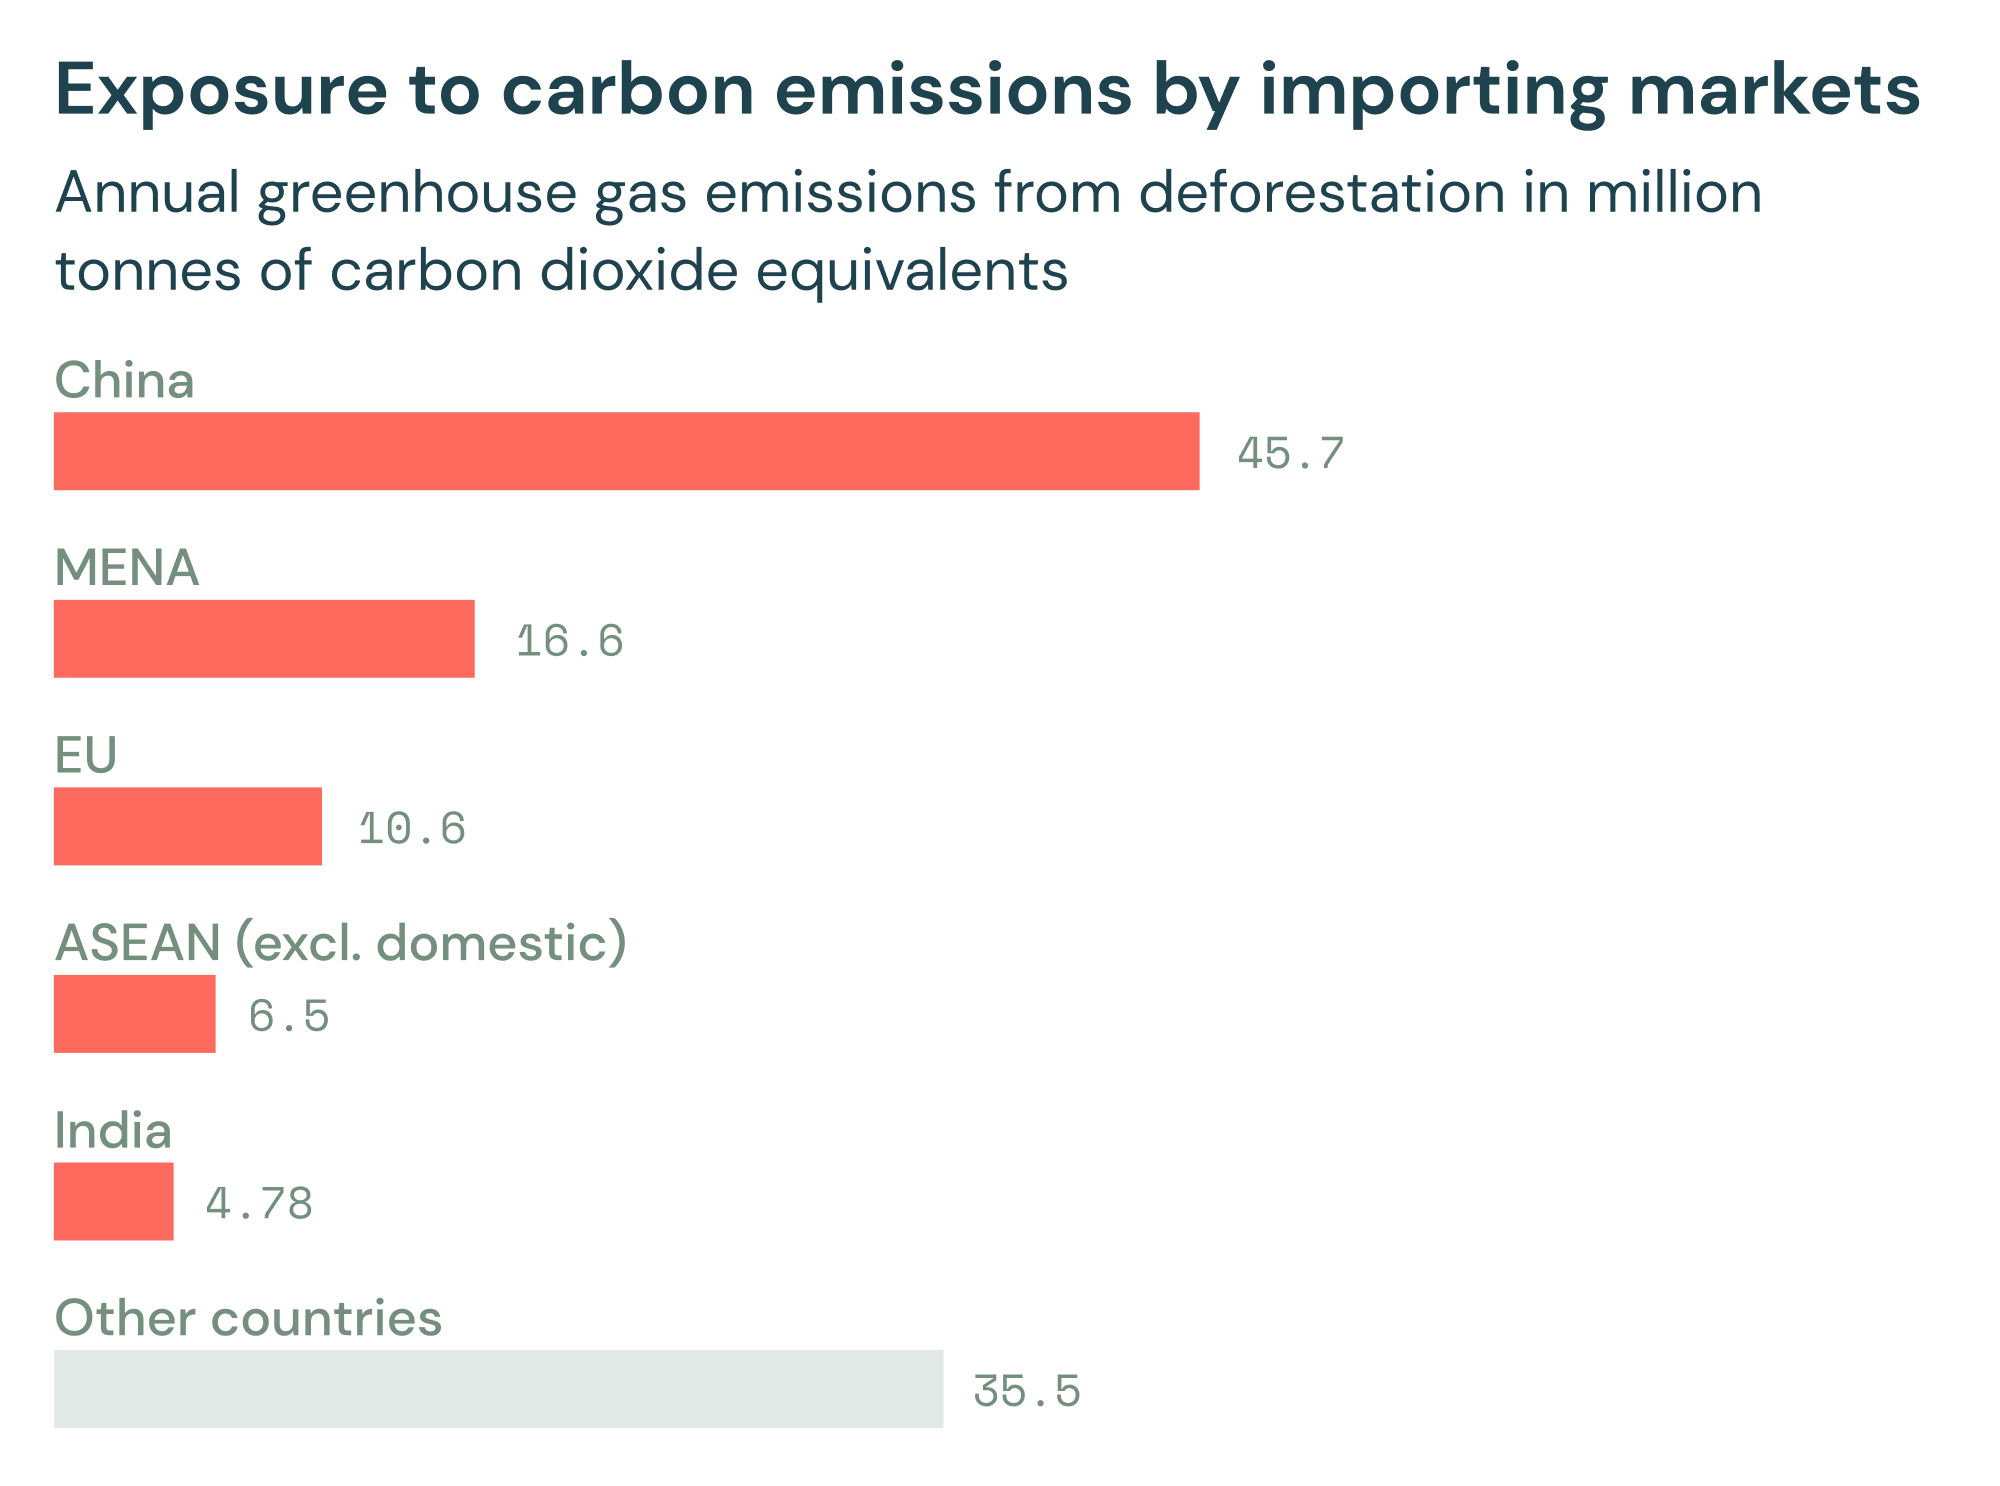 Exposure to carbon emissions linked to commodity imports by regional market